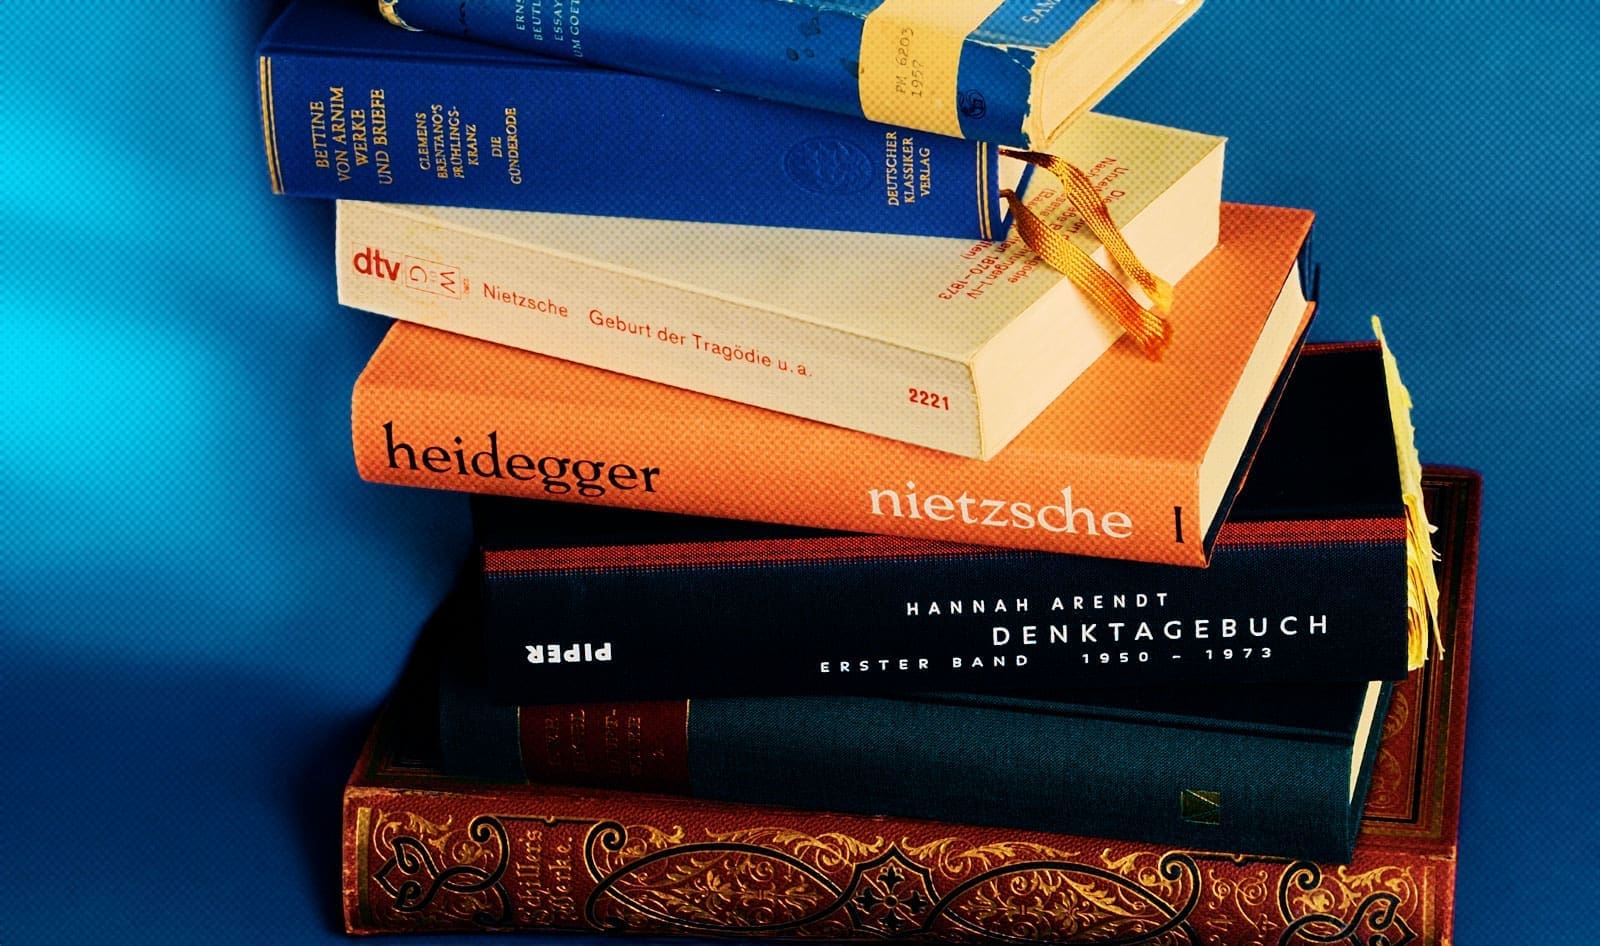 stack of books by Nietzche, Hannah Arendt, and more in German